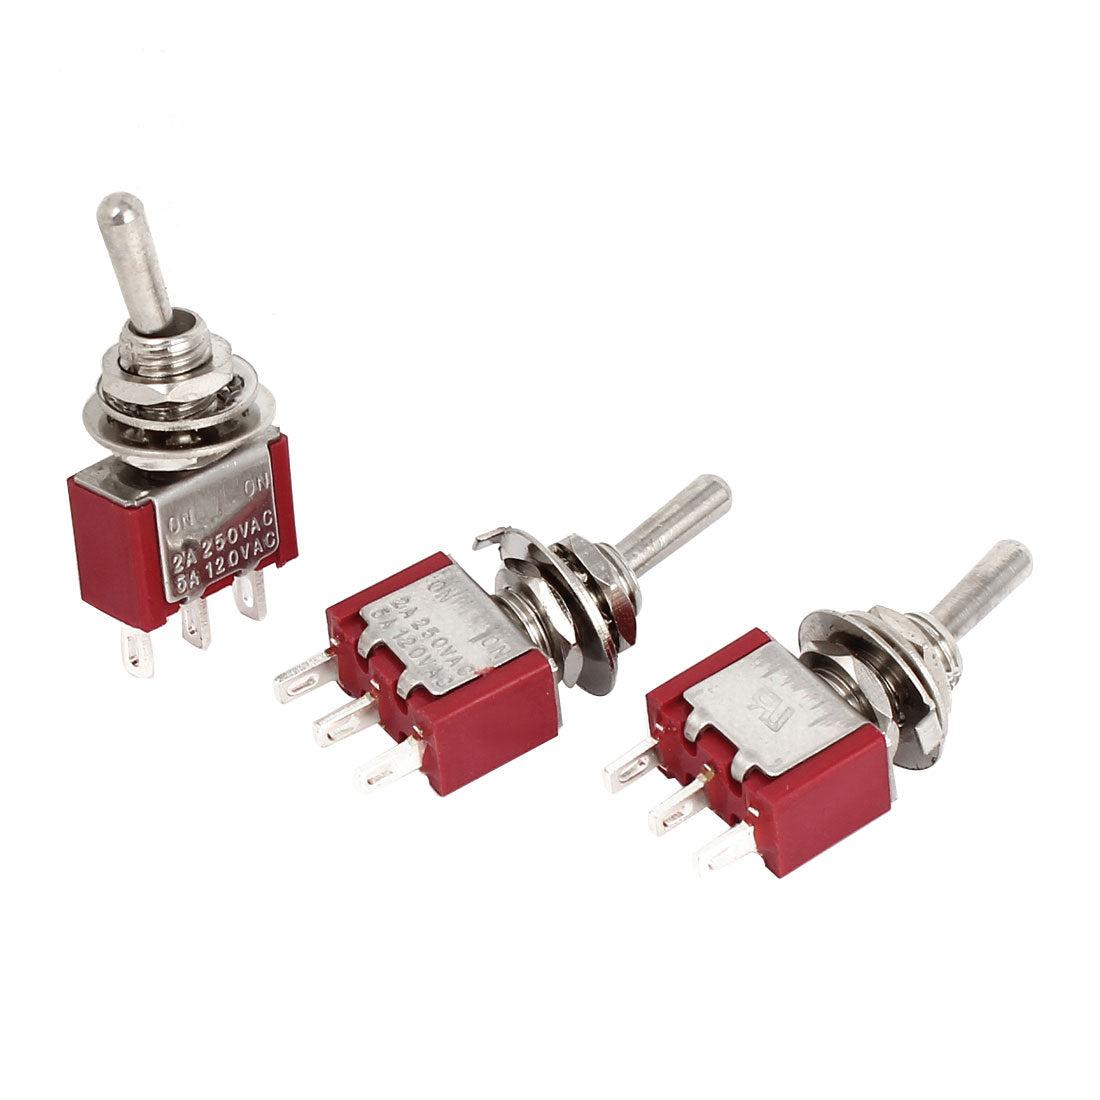 Uxcell Uxcell 3Pcs AC 250V/2A 120V/5A ON-ON 2 Position SPDT Mini Toggle Switch Red